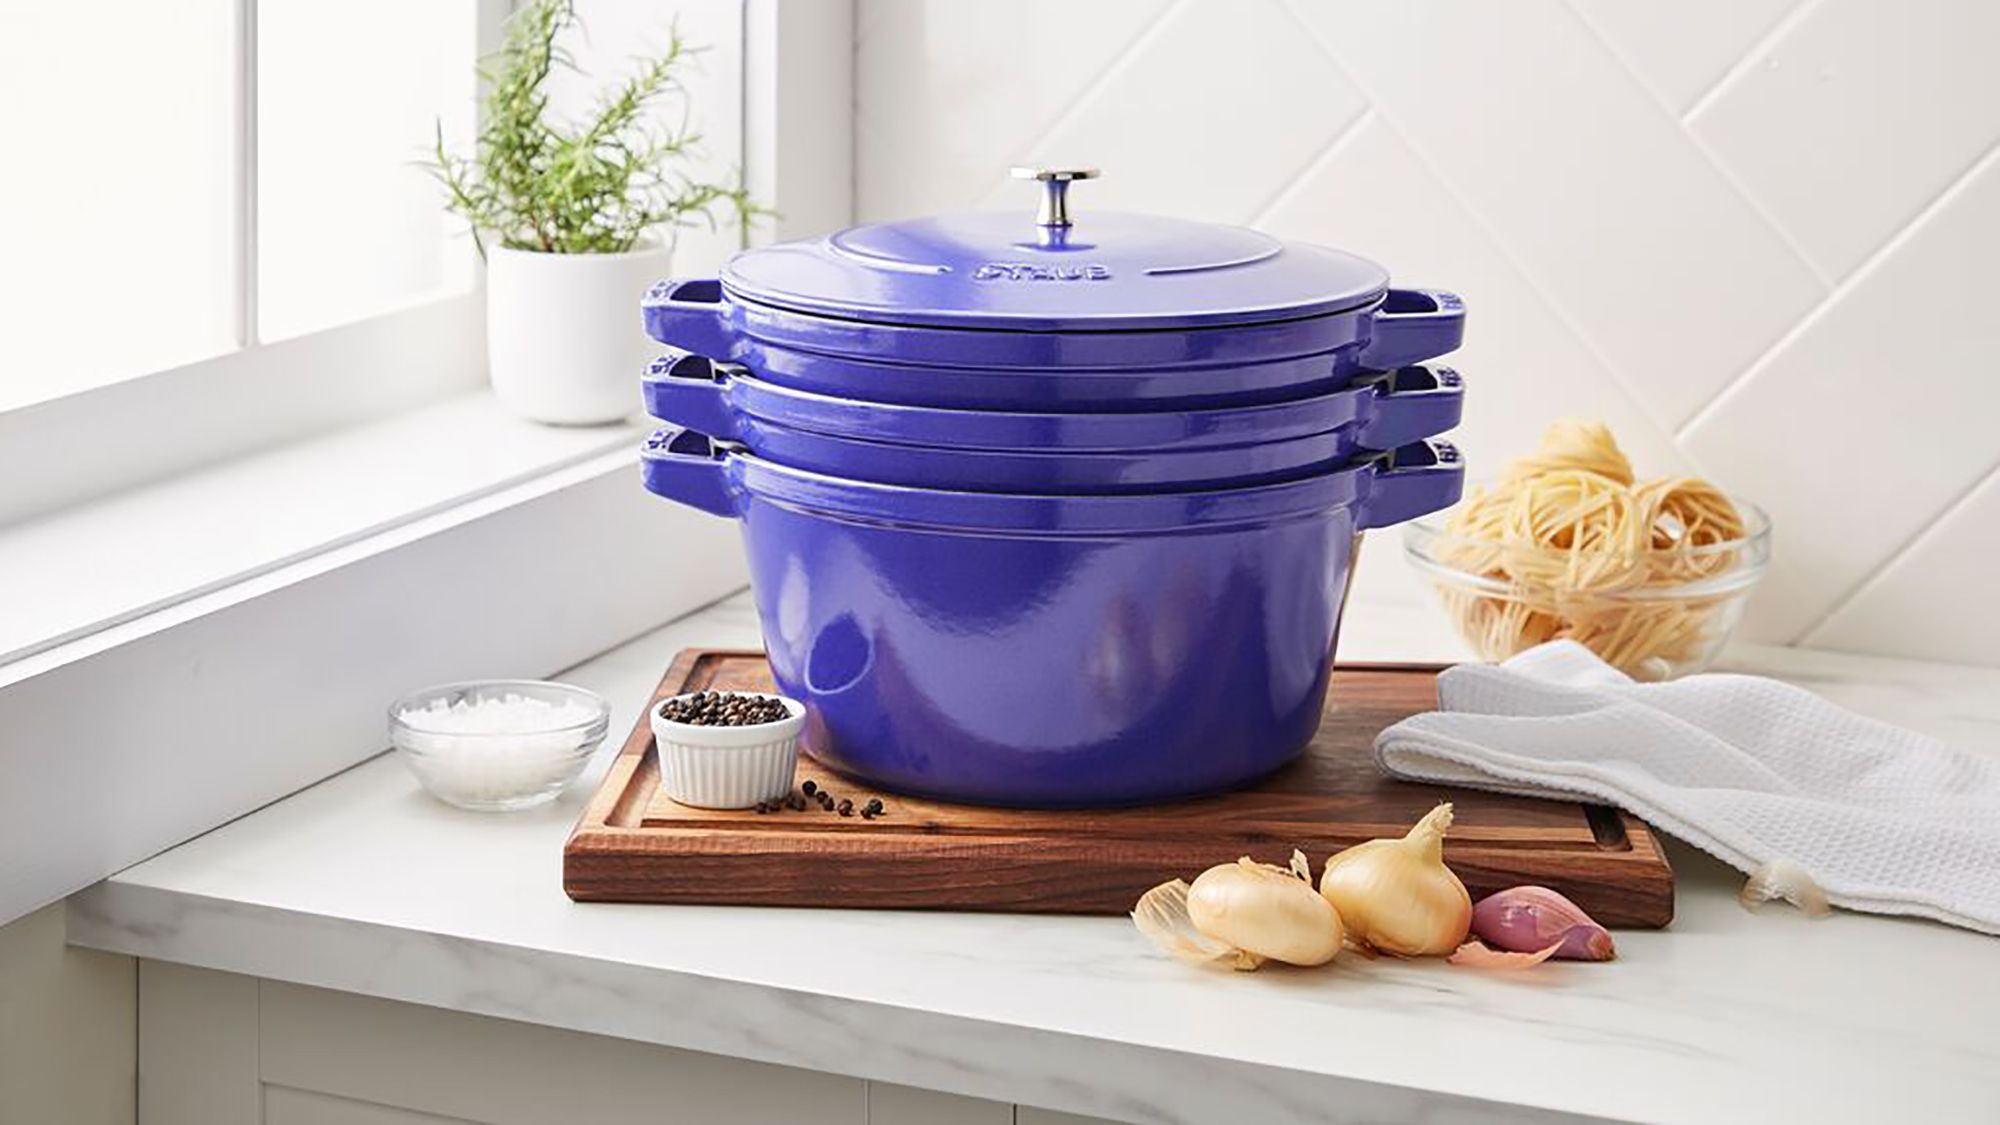 Cuyana, Spanx, Staub and more: Product releases this week